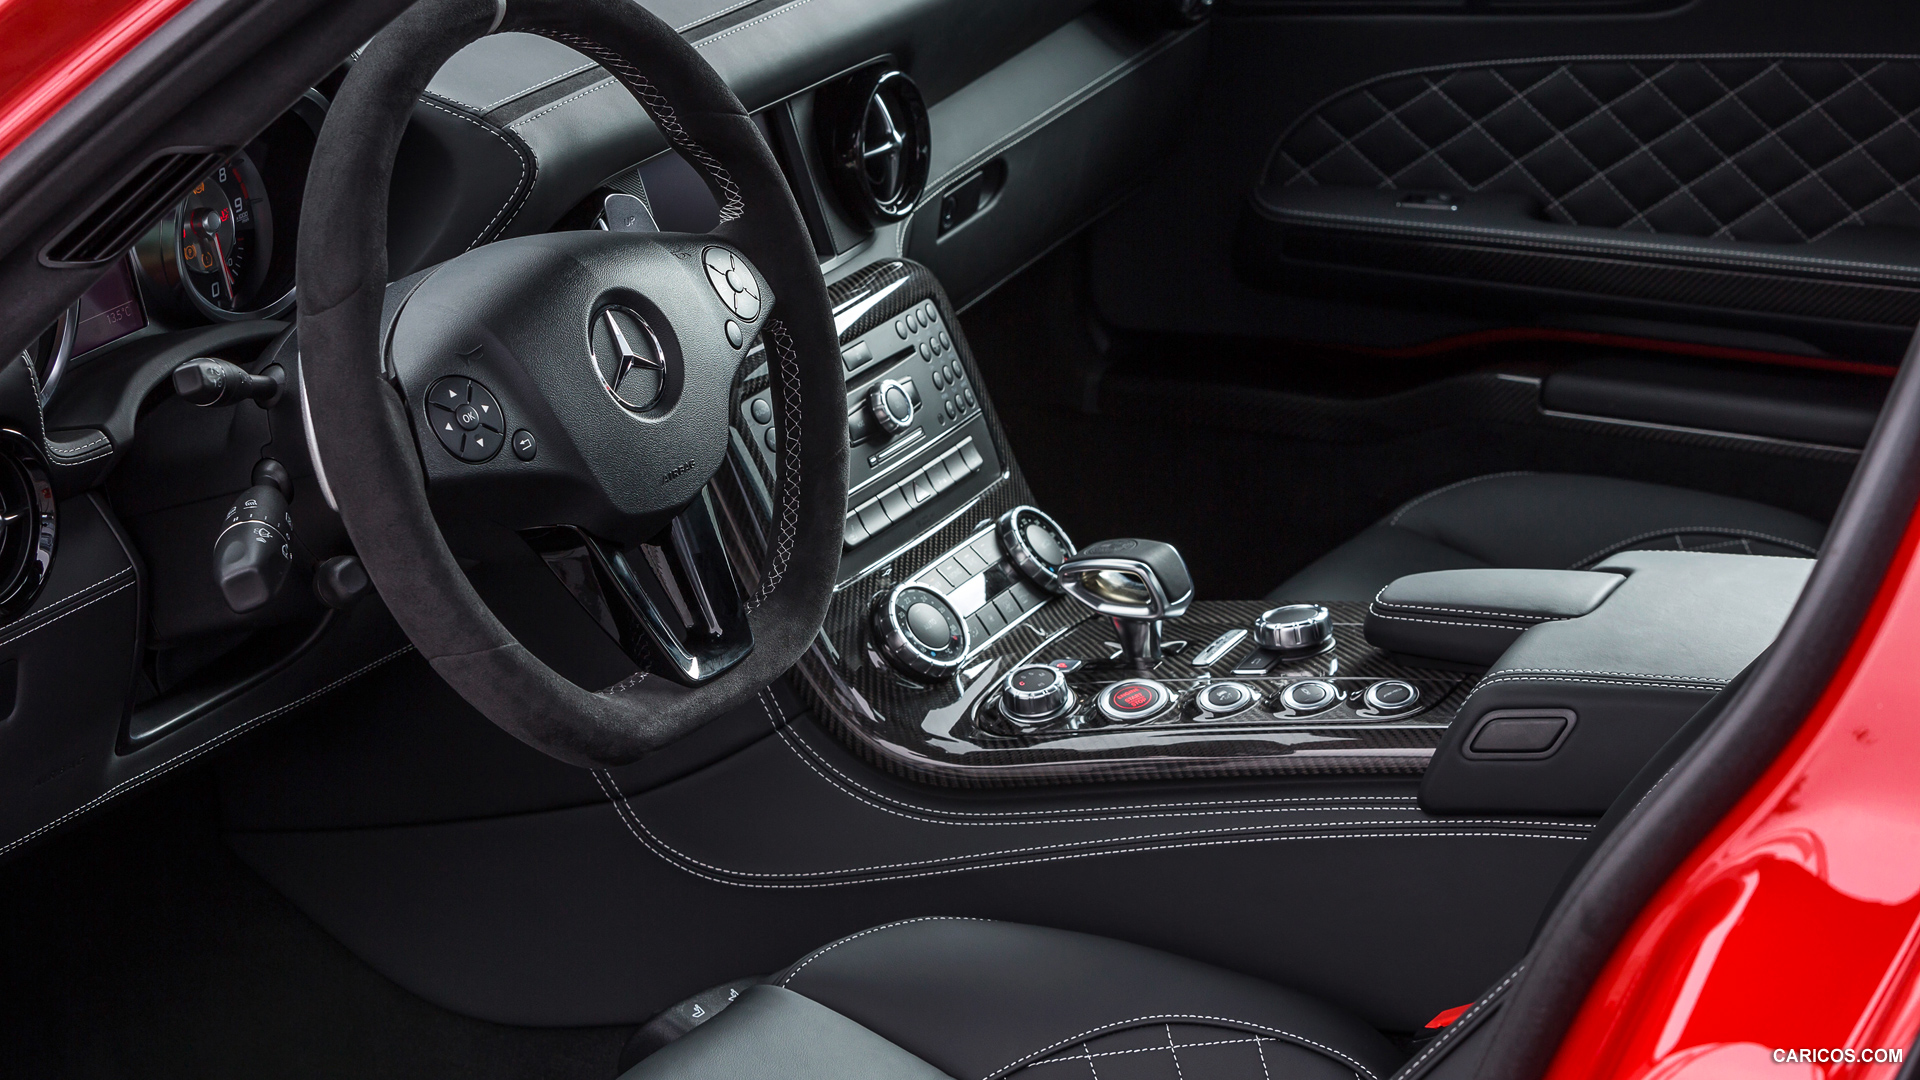  2015 Mercedes-Benz SLS AMG GT Coupe Final Edition - Interior, #31 of 41